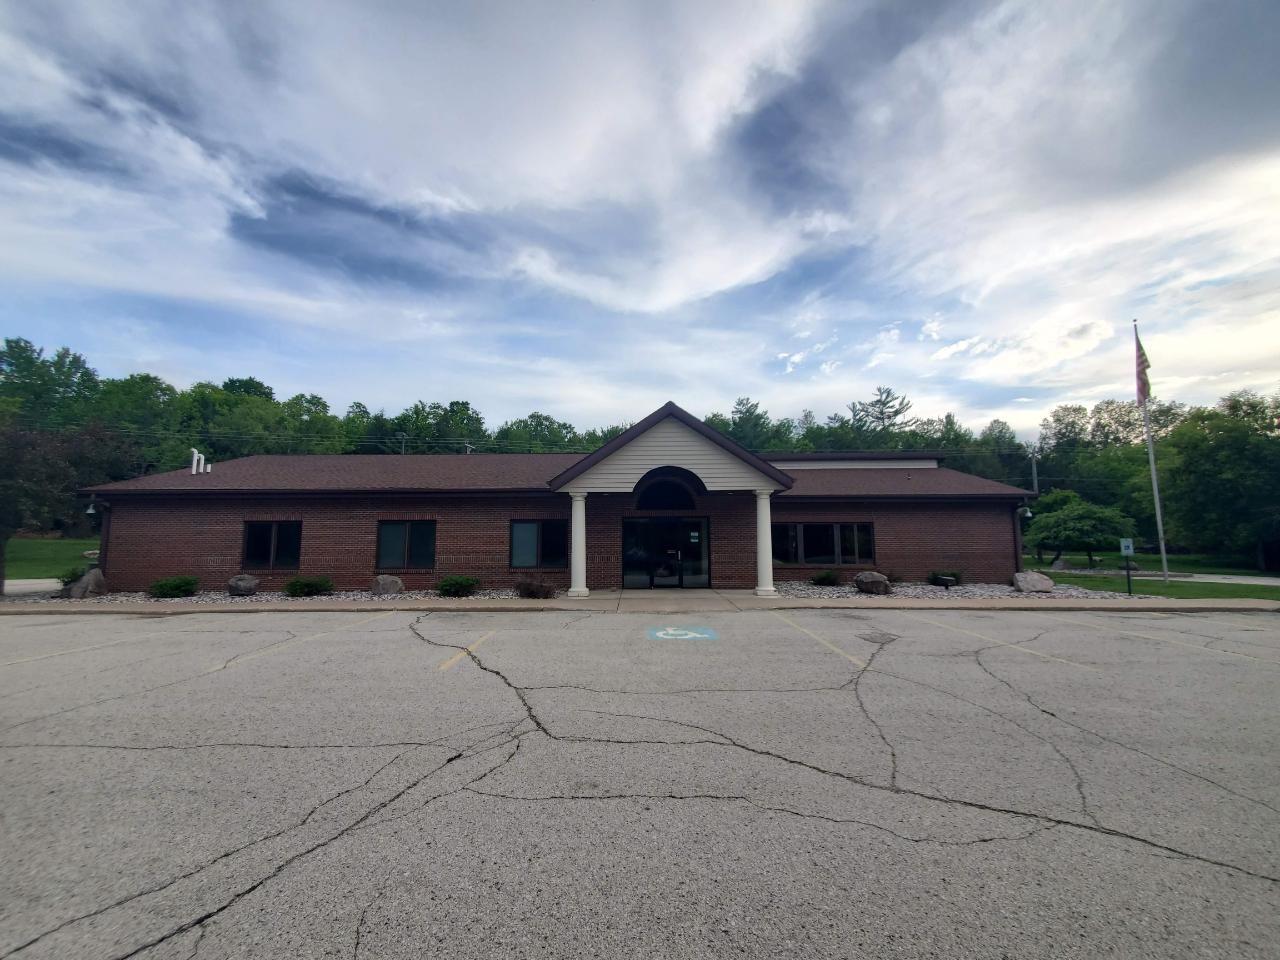 EXCELLENT BUSINESS LOCATION - This incredible 3,395 sqft brick-sided building features an updated interior, a main lobby with counter, 5 offices, a conference room, kitchen/ break room, vault, central air, a drive-thru, and alarm system. The property totals 1.80 acres, has 676 ft of road frontage and a paved parking lot with two driveways to County Road N. Possible business uses include dental, medical, daycare, retail and more. Don't miss this opportunity to start your business in this great Northwoods community!